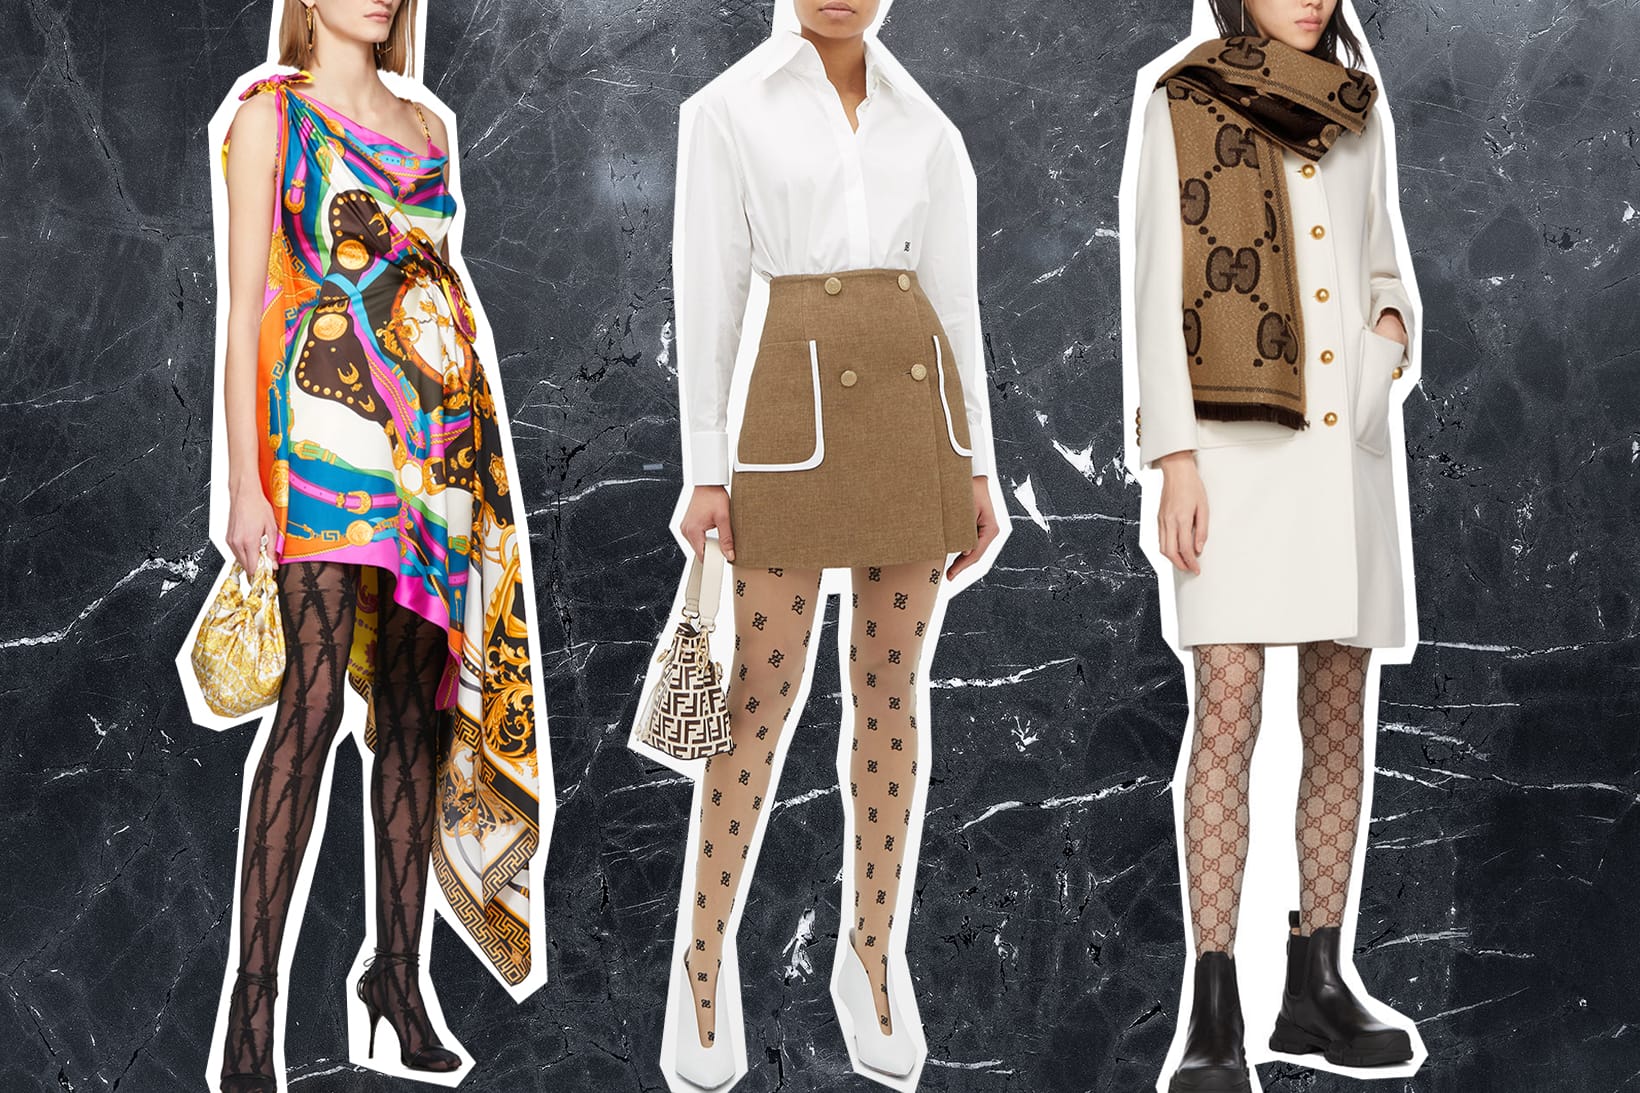 fendi tights outfit ideas